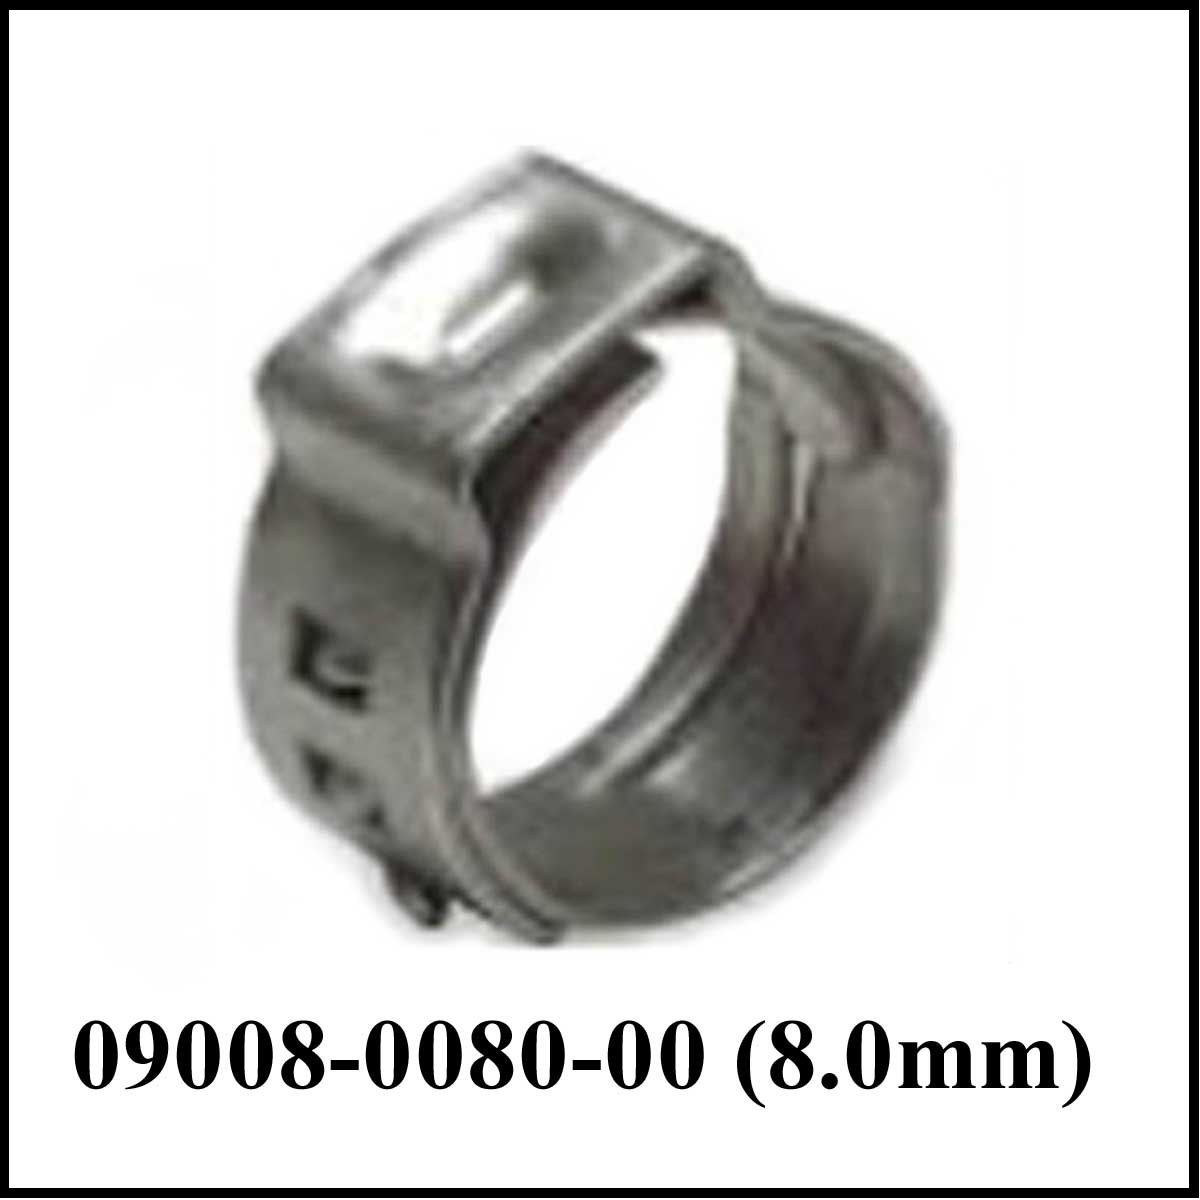 Oetiker Hose Clamp Size Chart